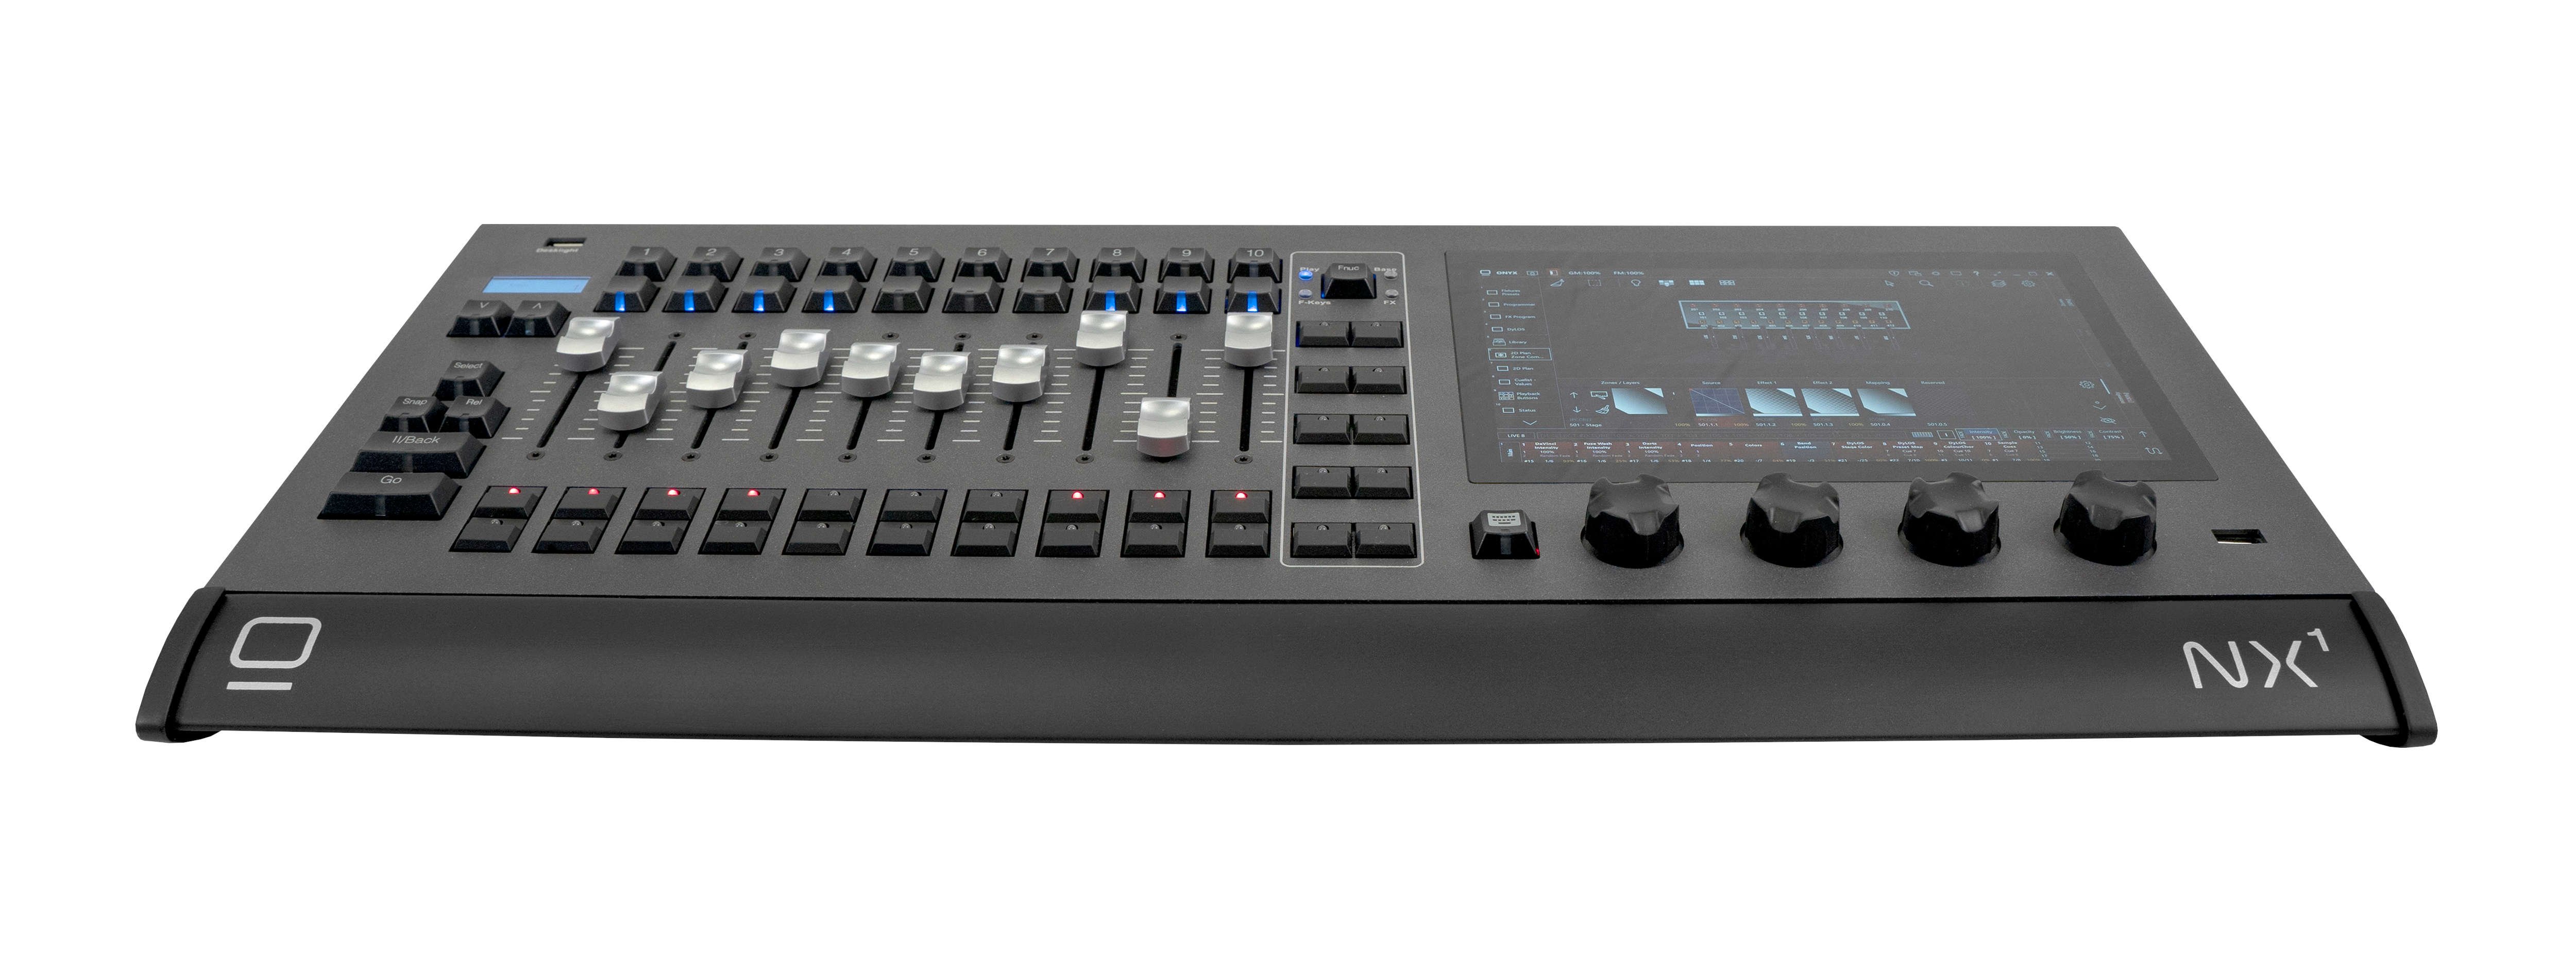 tilgive Moderat Forskel Obsidian Control Systems NX1 8 Universe, 10 Motorized Playback ONYX  Lighting Controller | Full Compass Systems